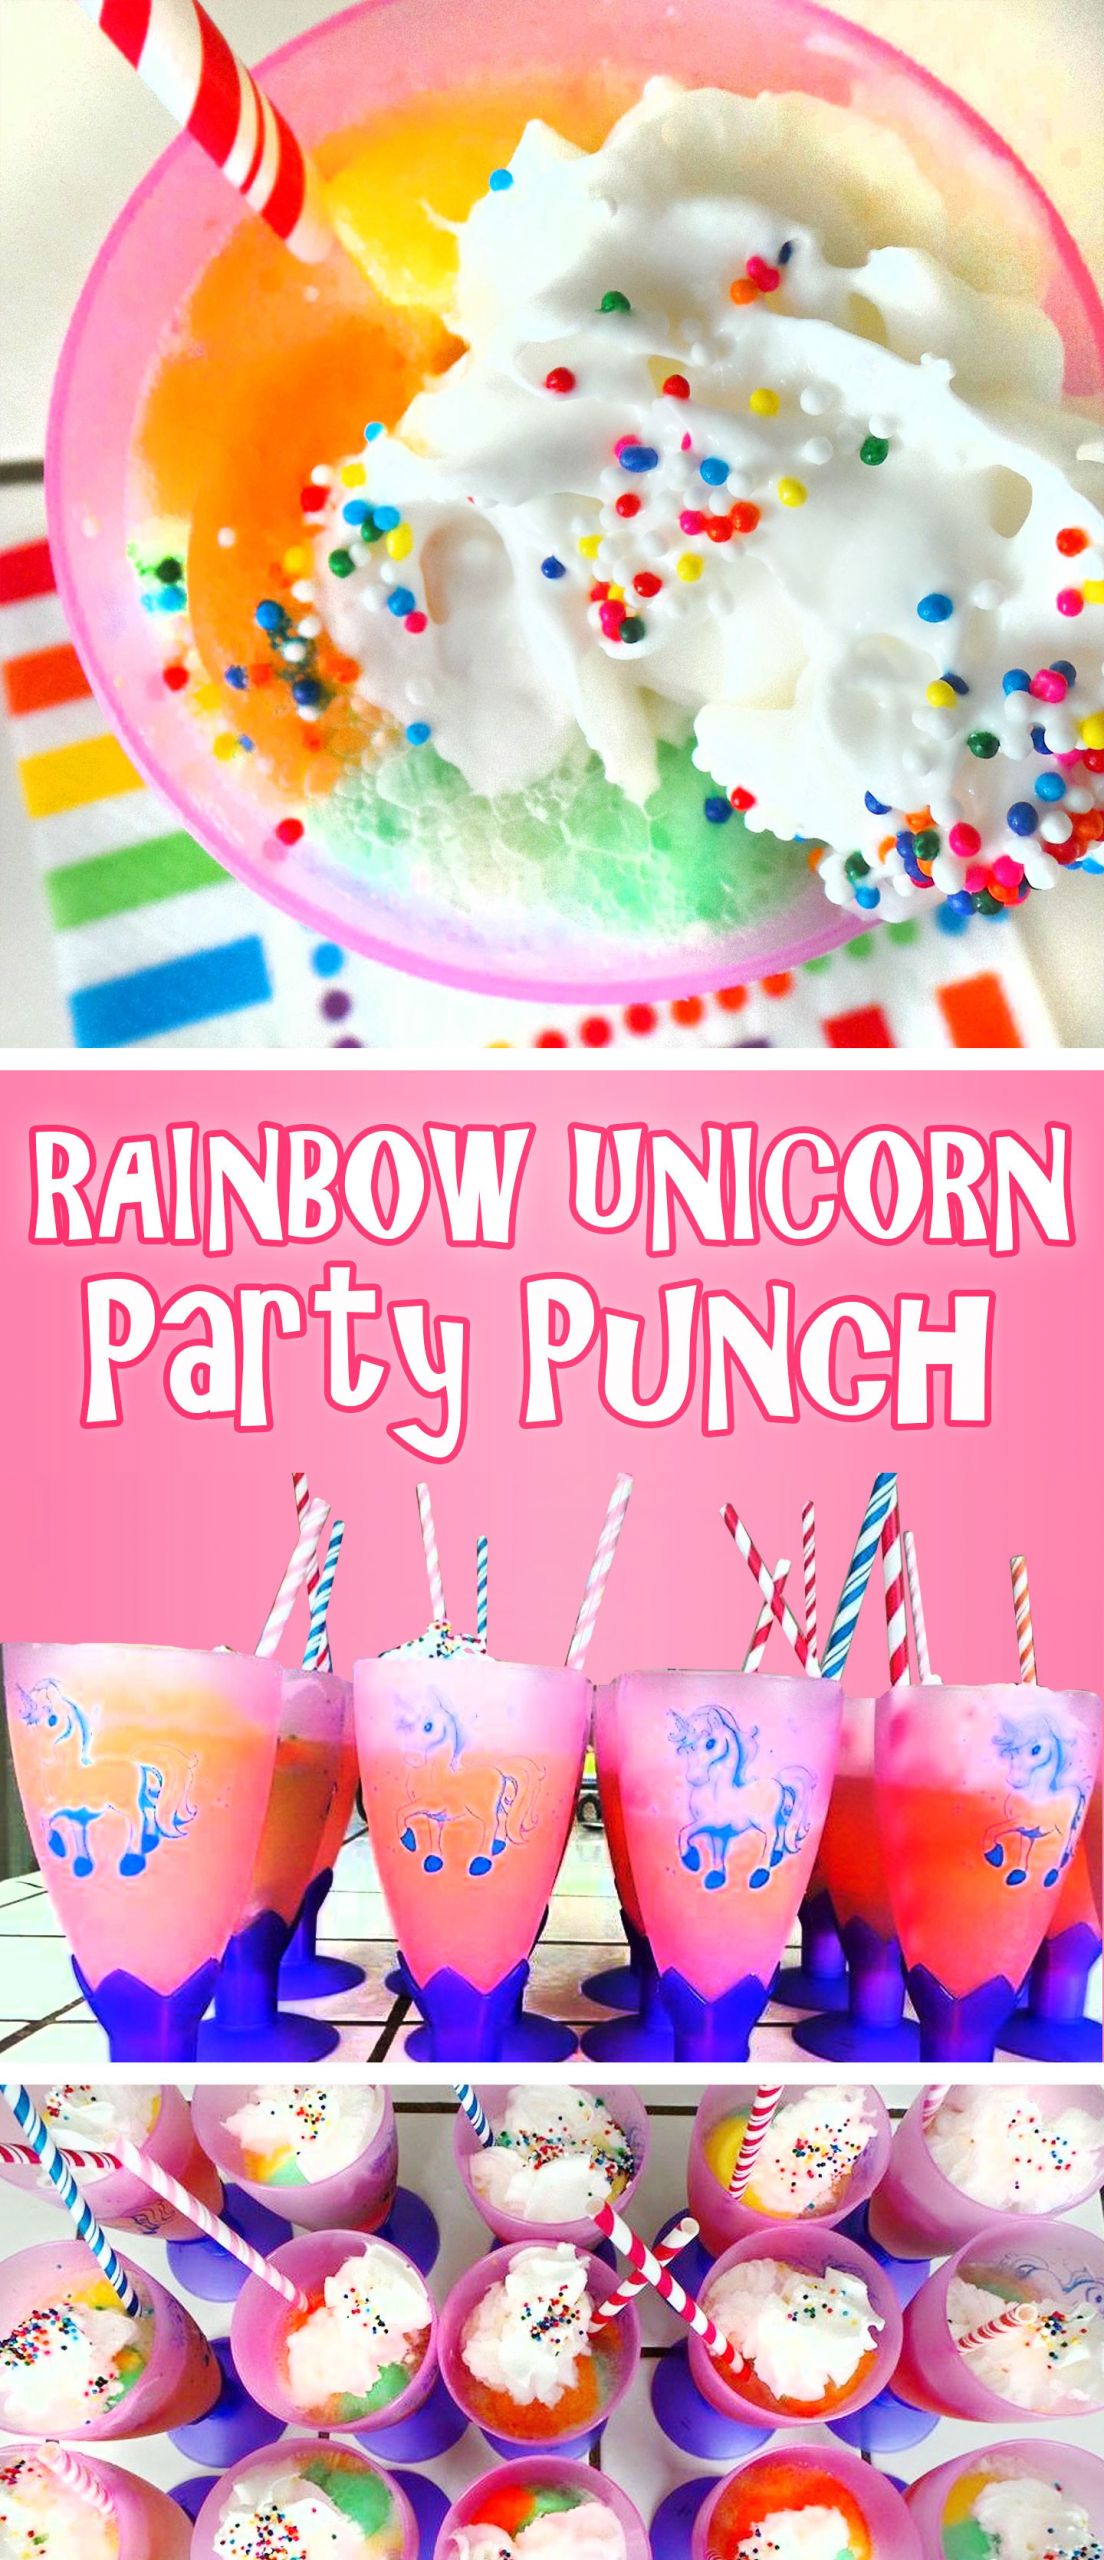 Birthday Party Punch
 Rainbow Unicorn Party Punch